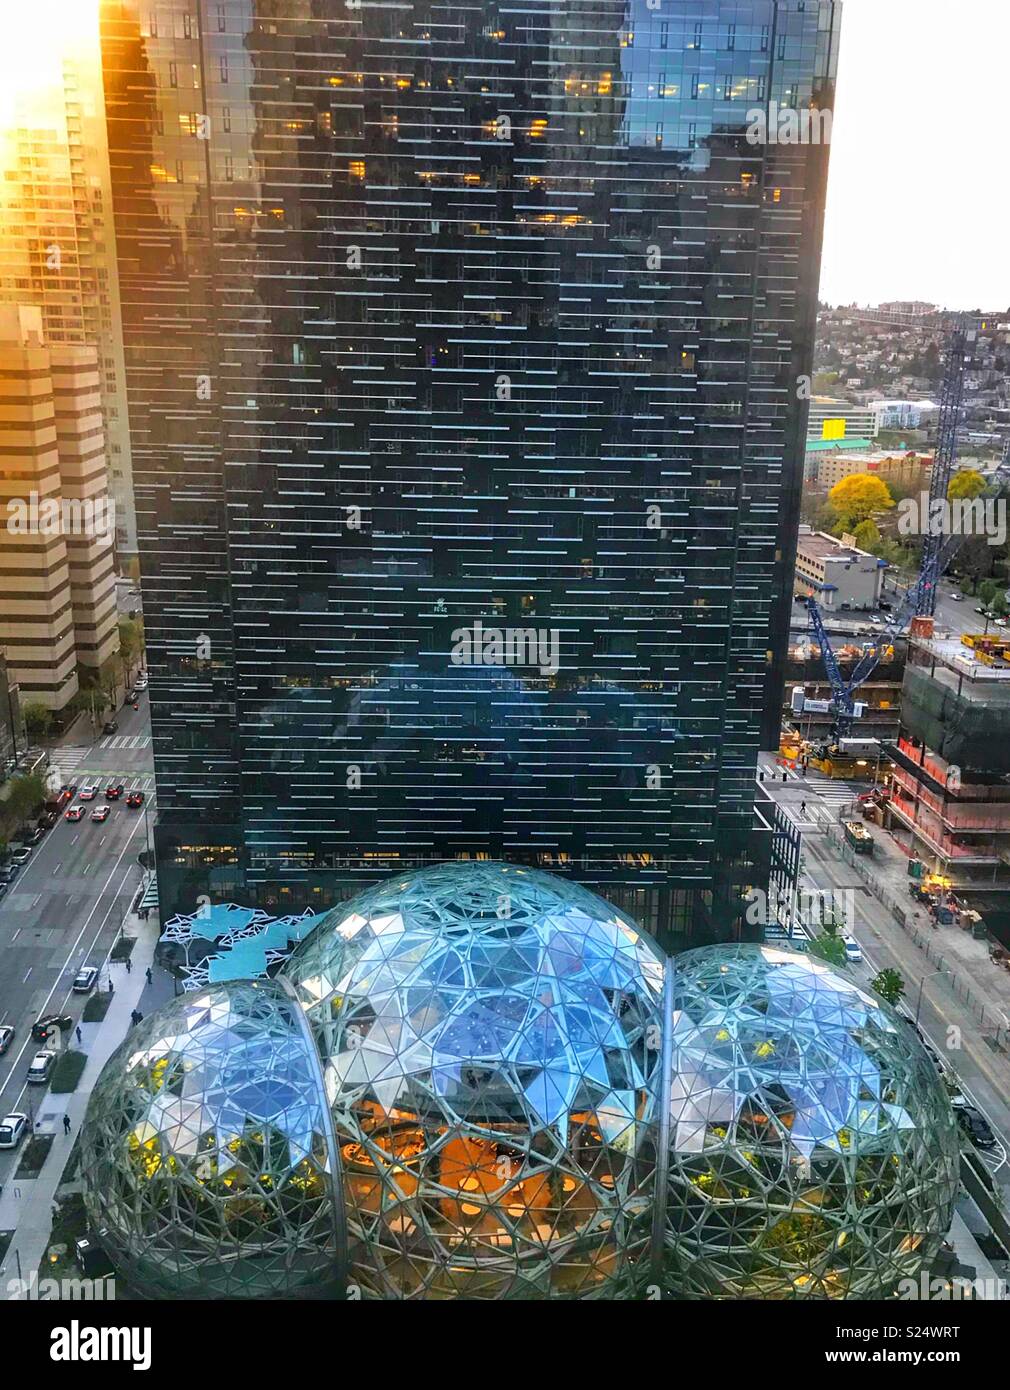 Day 1 tower, Amazon building in Seattle Washington. Spheres in the foreground Stock Photo